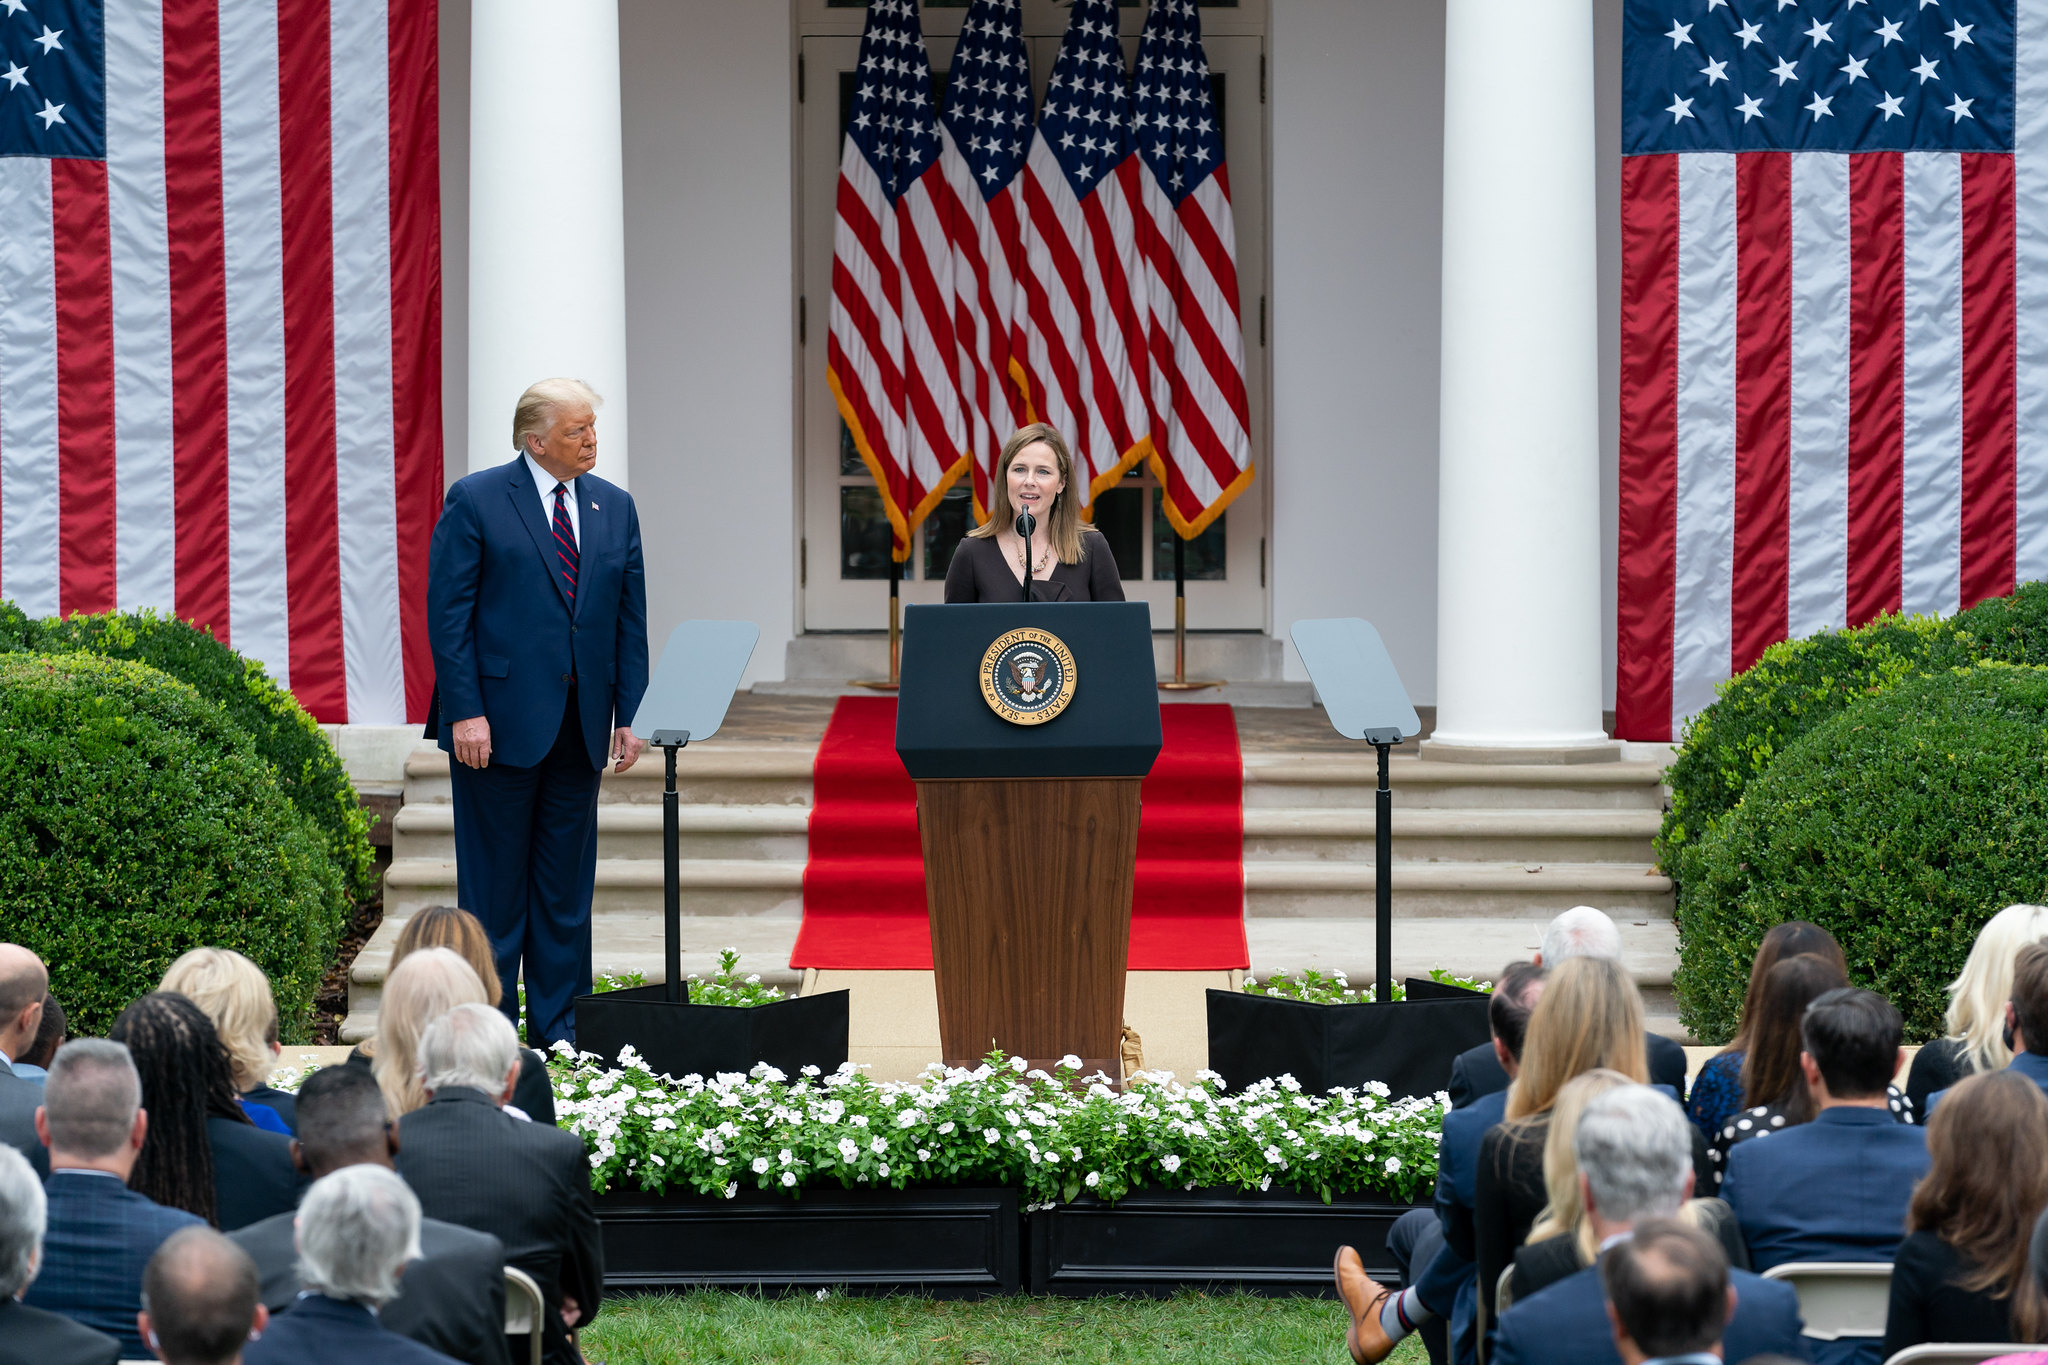 JUDGE AMY CONEY BARRETT SPEAKS AT THE WHITE HOUSE DAYS BEFORE HER CONFIRMATION TO THE SUPREME COURT. PHOTO ANDREA HANKS